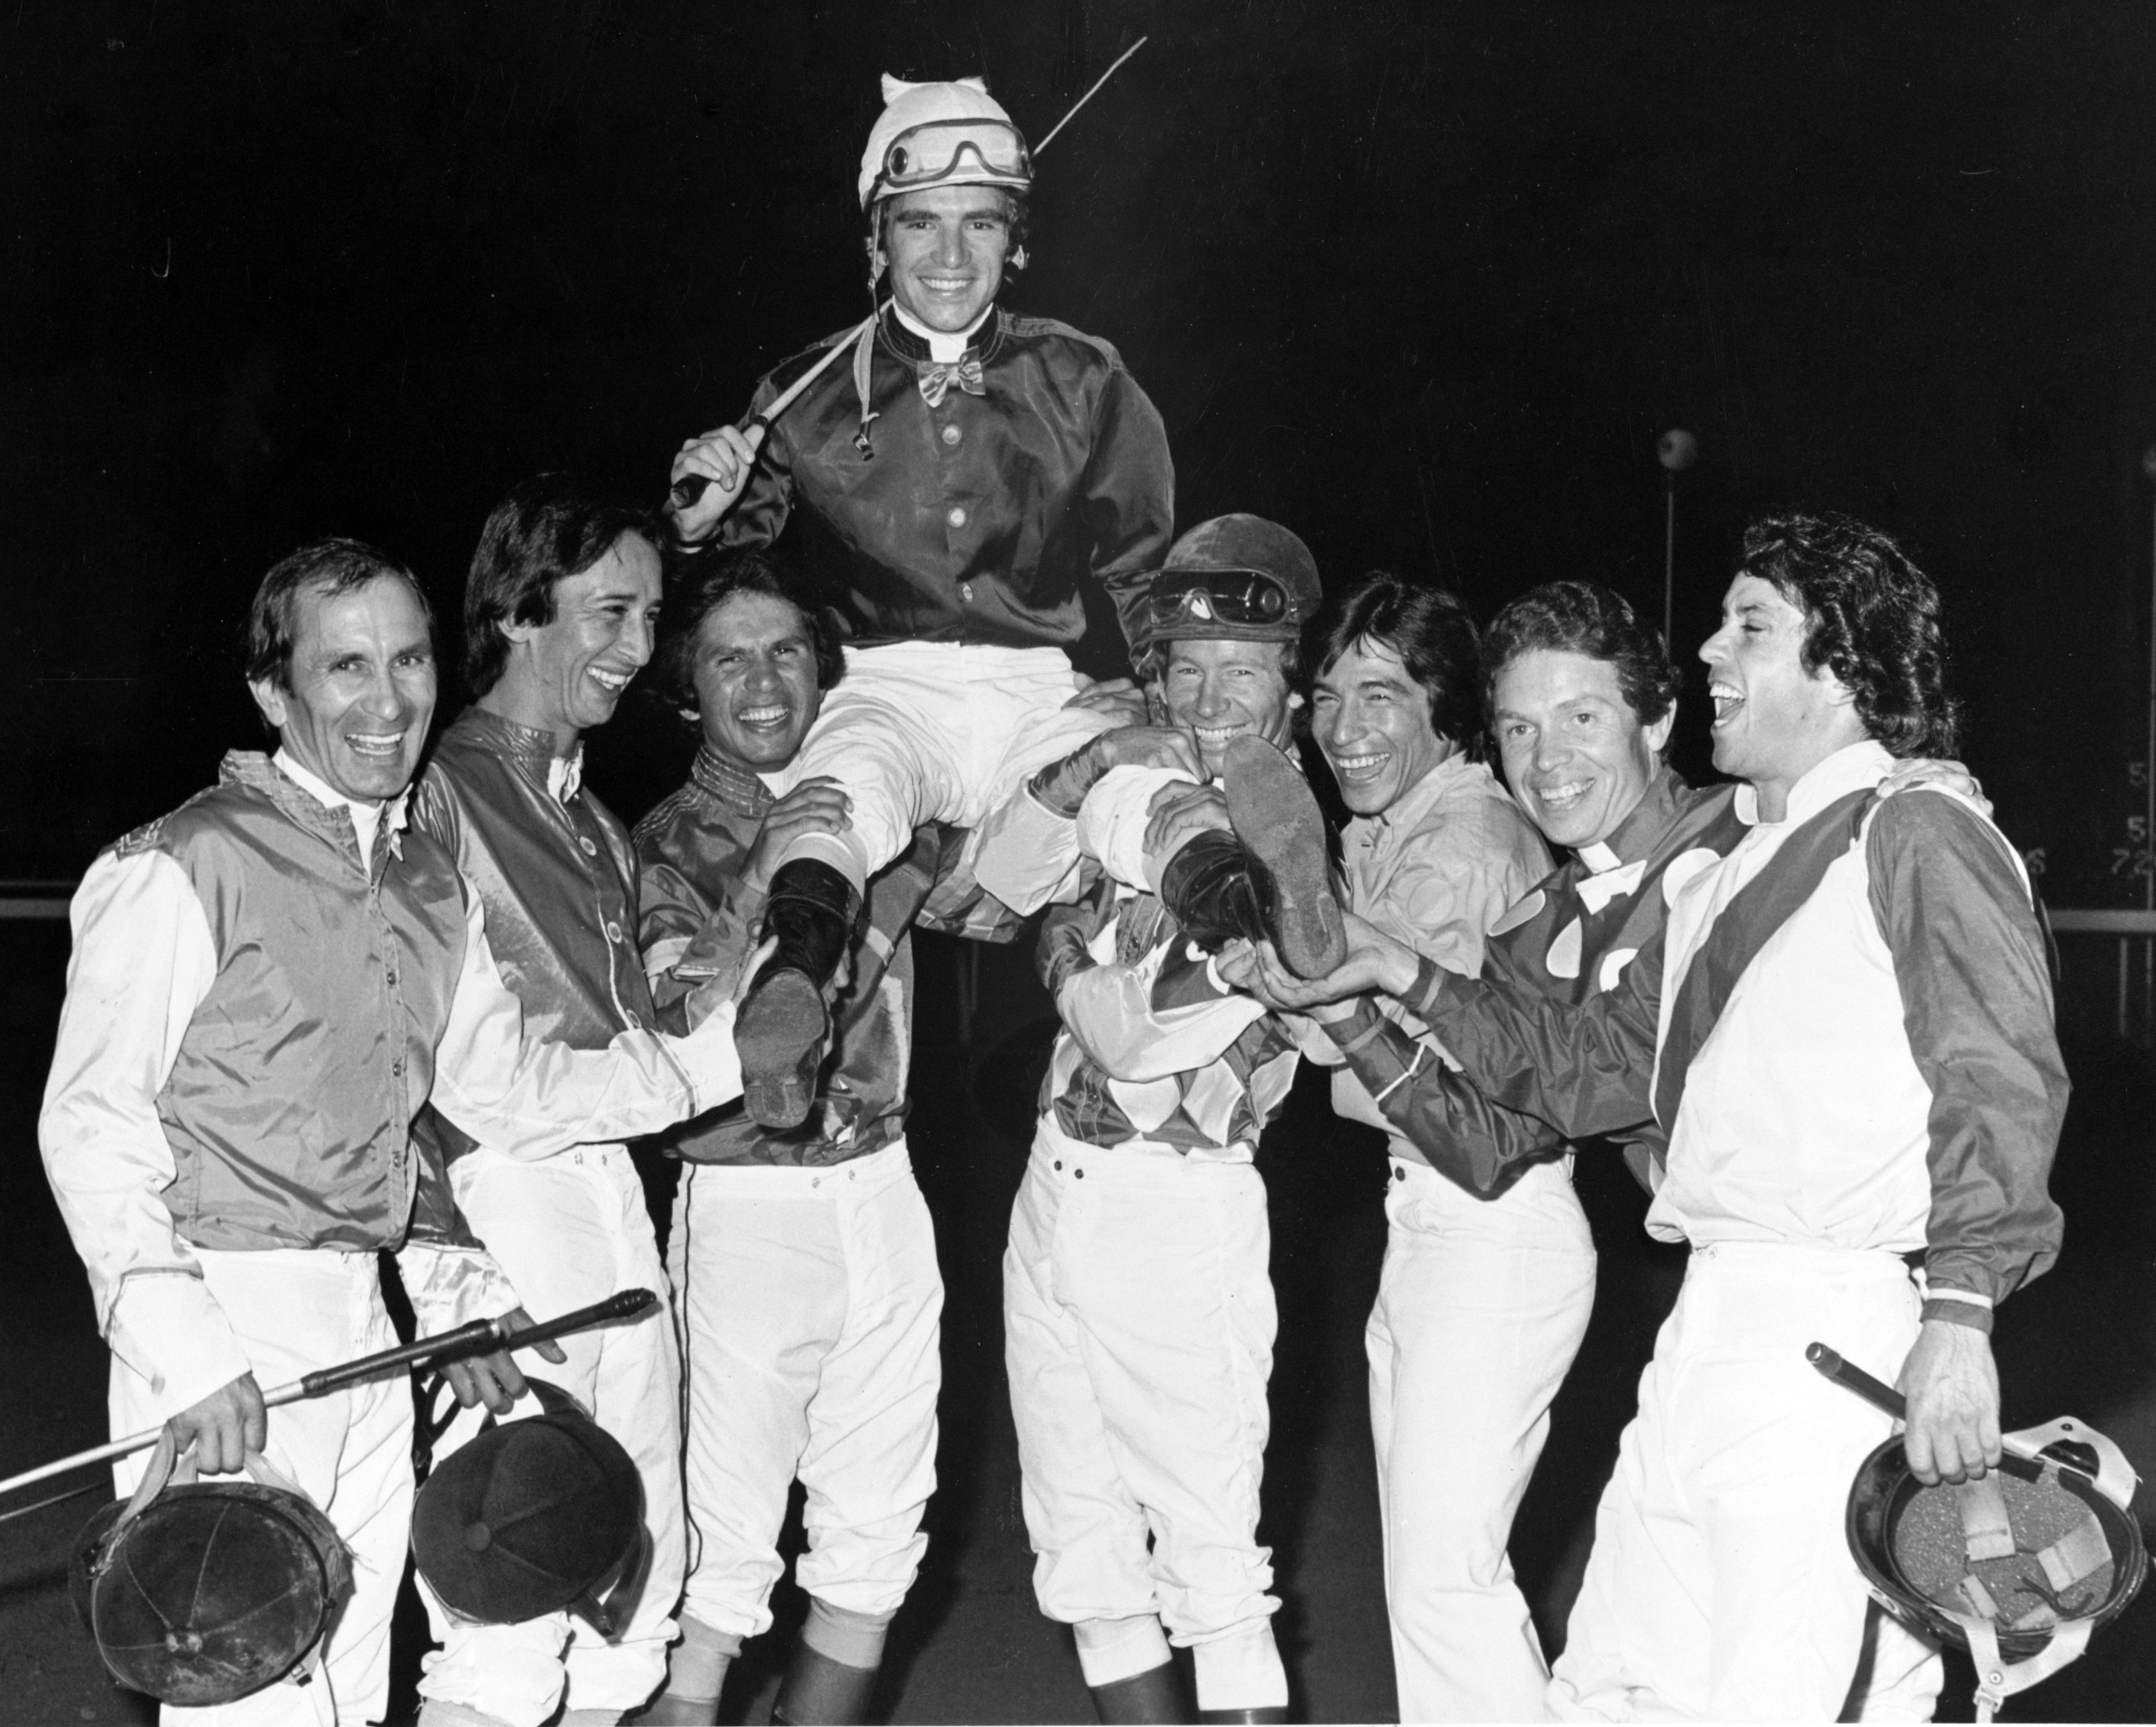 Darrel McHargue being lifted up in celebration by the Hollywood Park jockey colony after his second consecutive Moonlight Derby win (Keeneland Library Thoroughbred Times Collection)